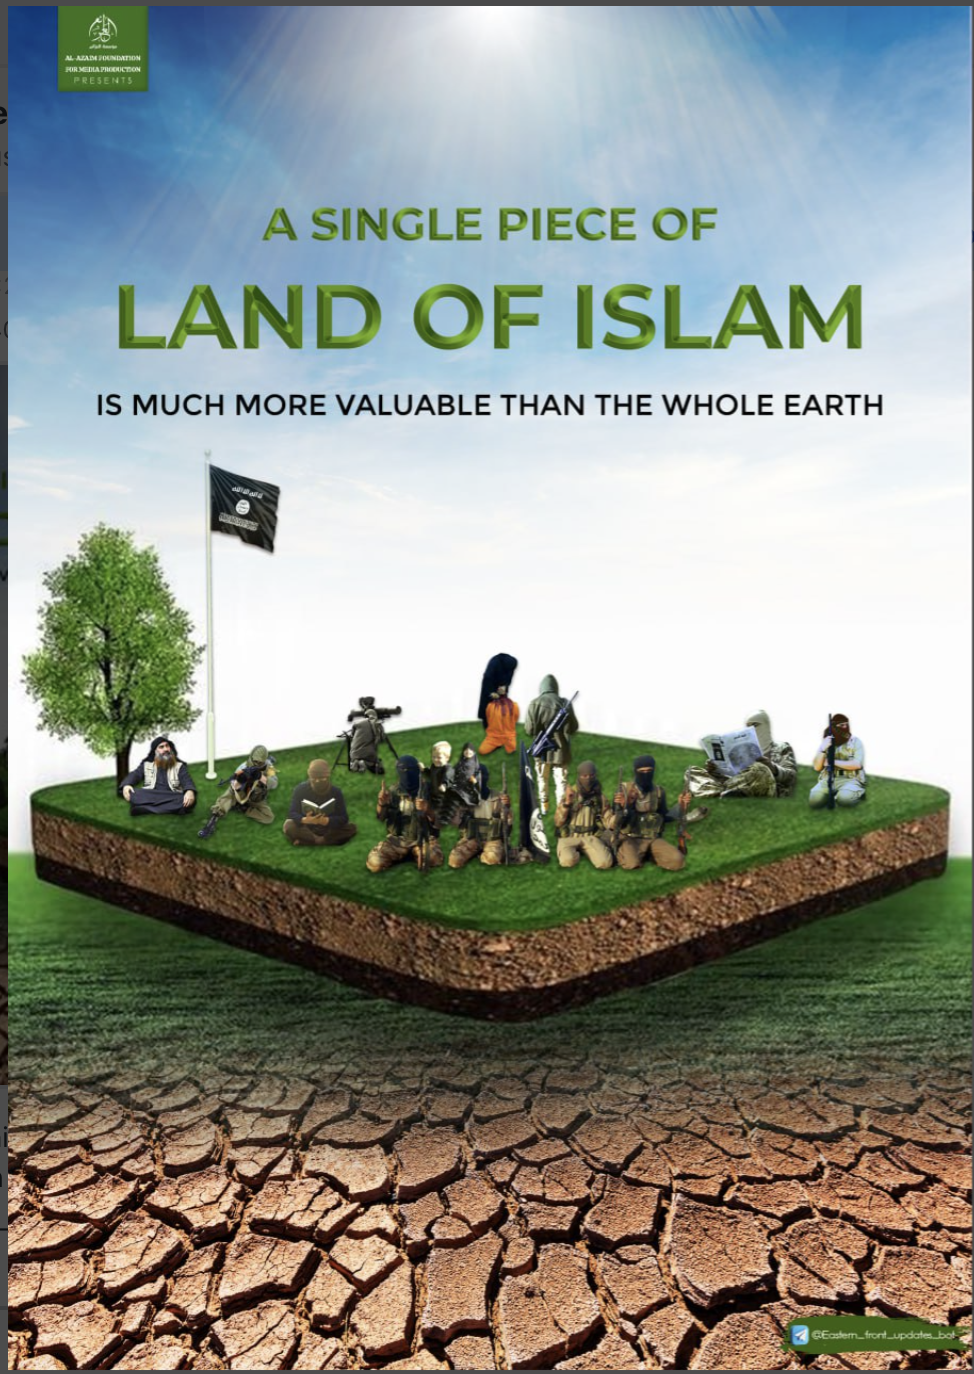 (Poster) al-Azaim Foundation (Unofficial Islamic State Khurasan/ISK) Releases a Poster "A Single Piece of Land of Islam is Much More Valuable Than the Whole Earth" - 12 September 2023